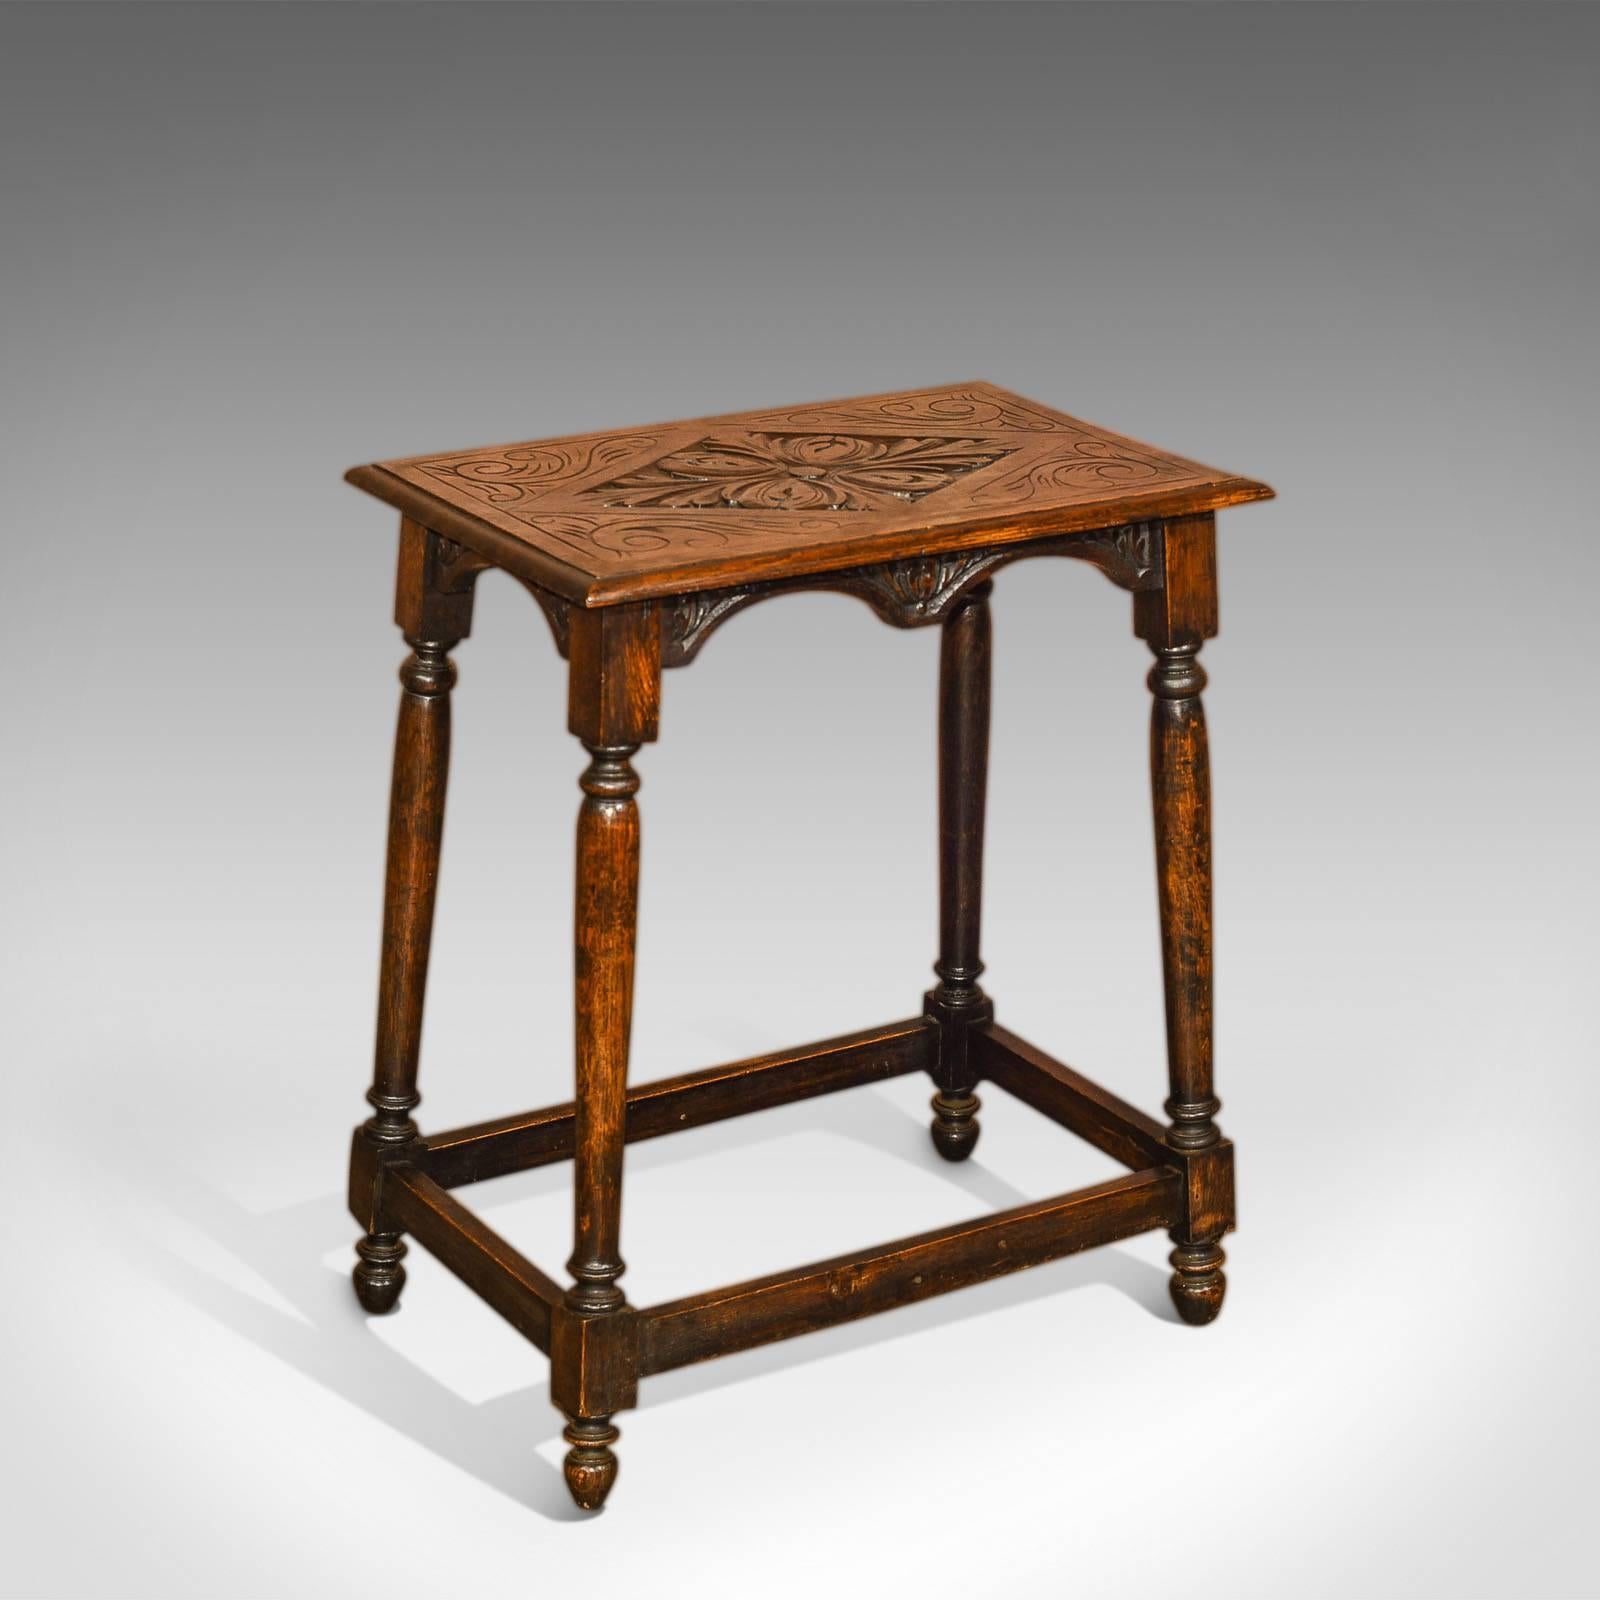 This is an antique, Victorian, oak occasional table dating to circa 1890.

Raised on turned oak legs and feet with square section where the boxed stretcher unites them, this diminutive side table carries a warm, country look. The dark, aged finish